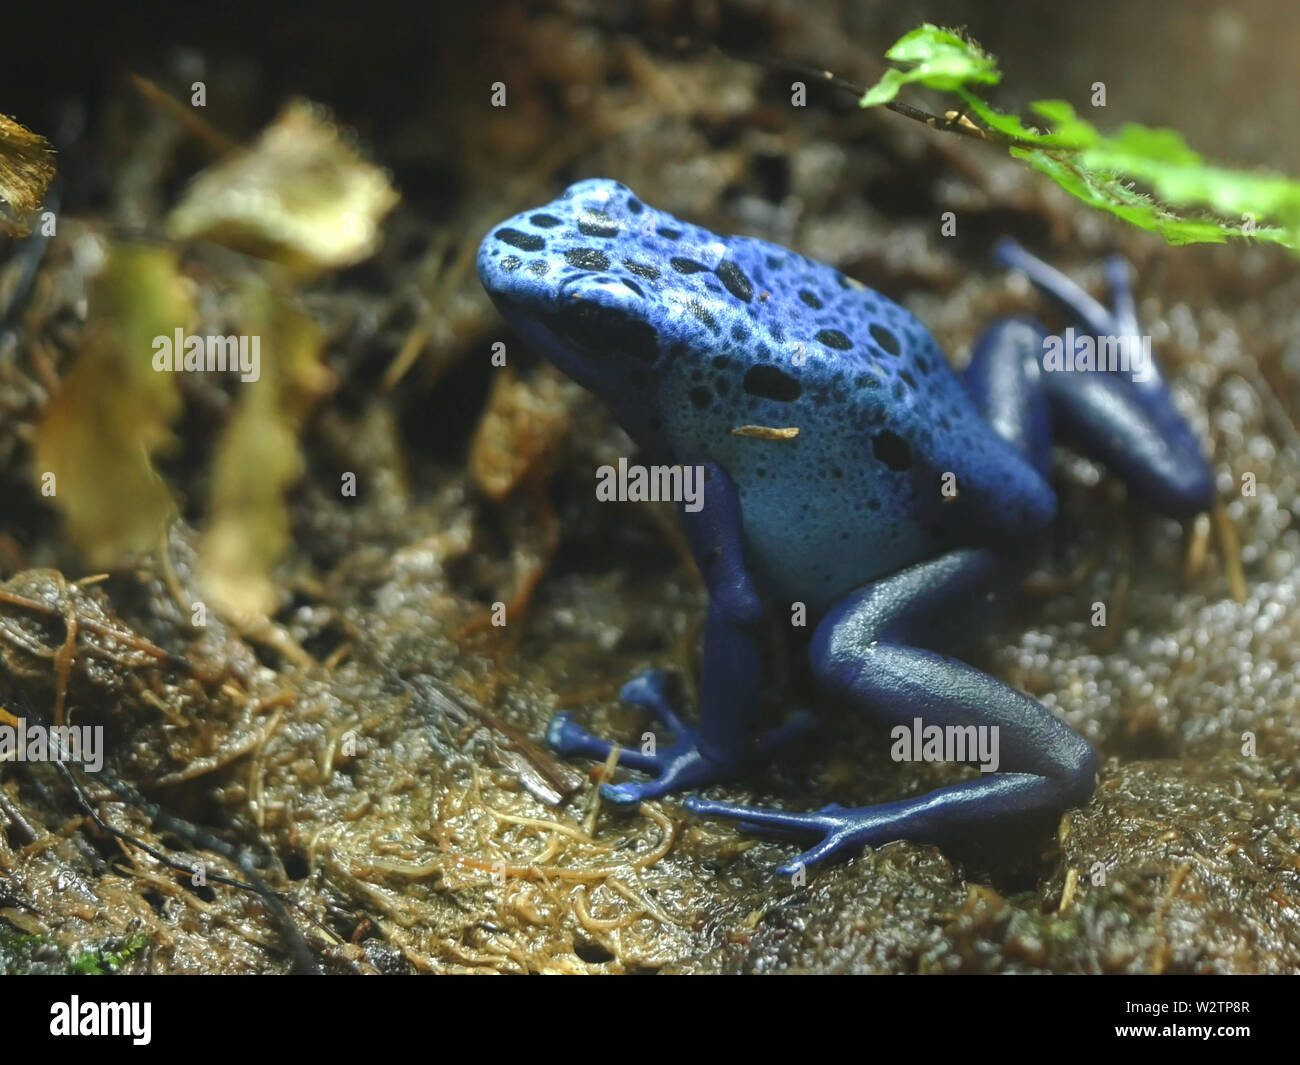 close up side on shot of a blue poison frog Stock Photo